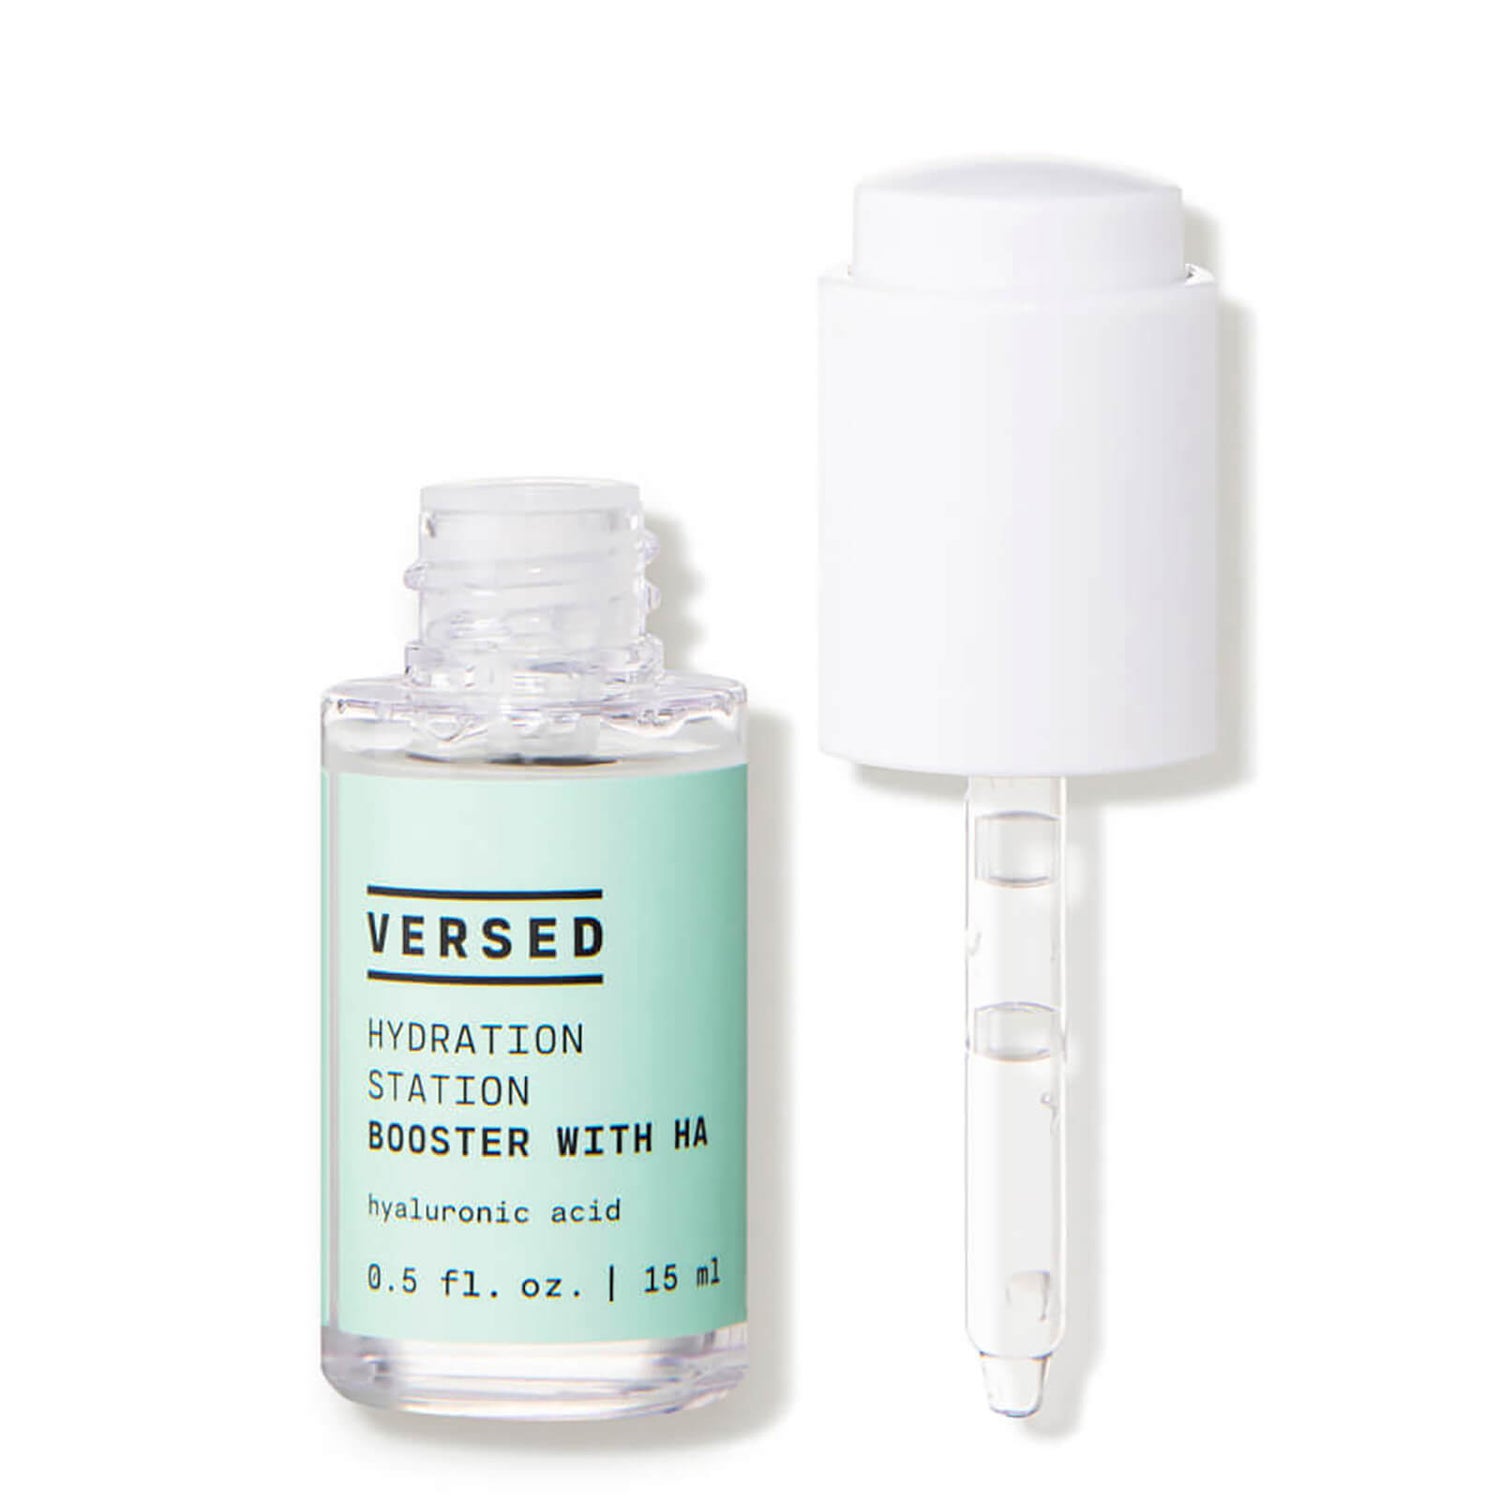 Versed Hydration Station Booster with HA (0.5 fl. oz.)